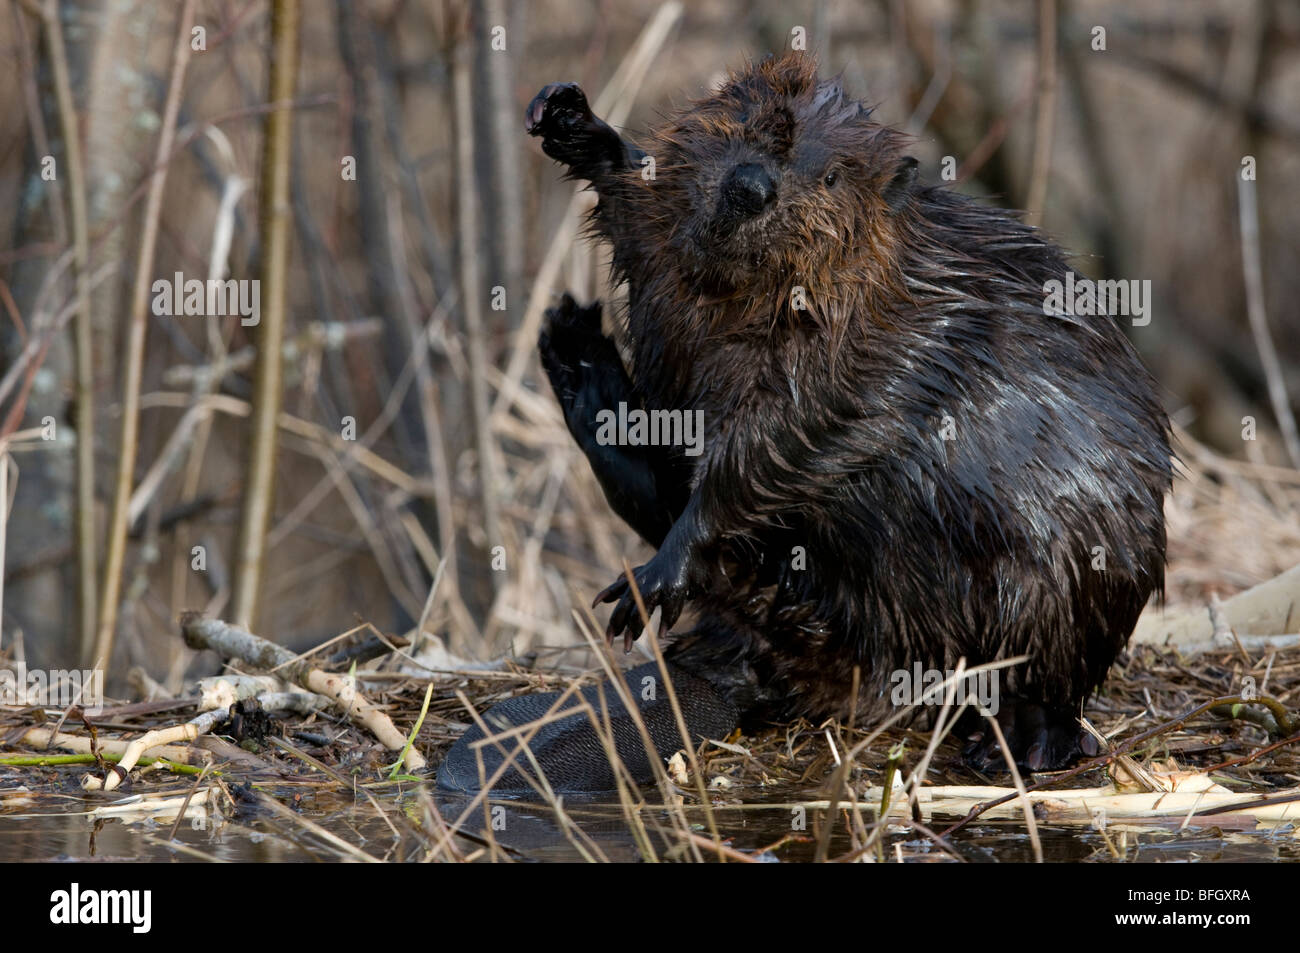 Beaver (Castor canadensis) sitting and scratching itself, Ontario, Canada Stock Photo